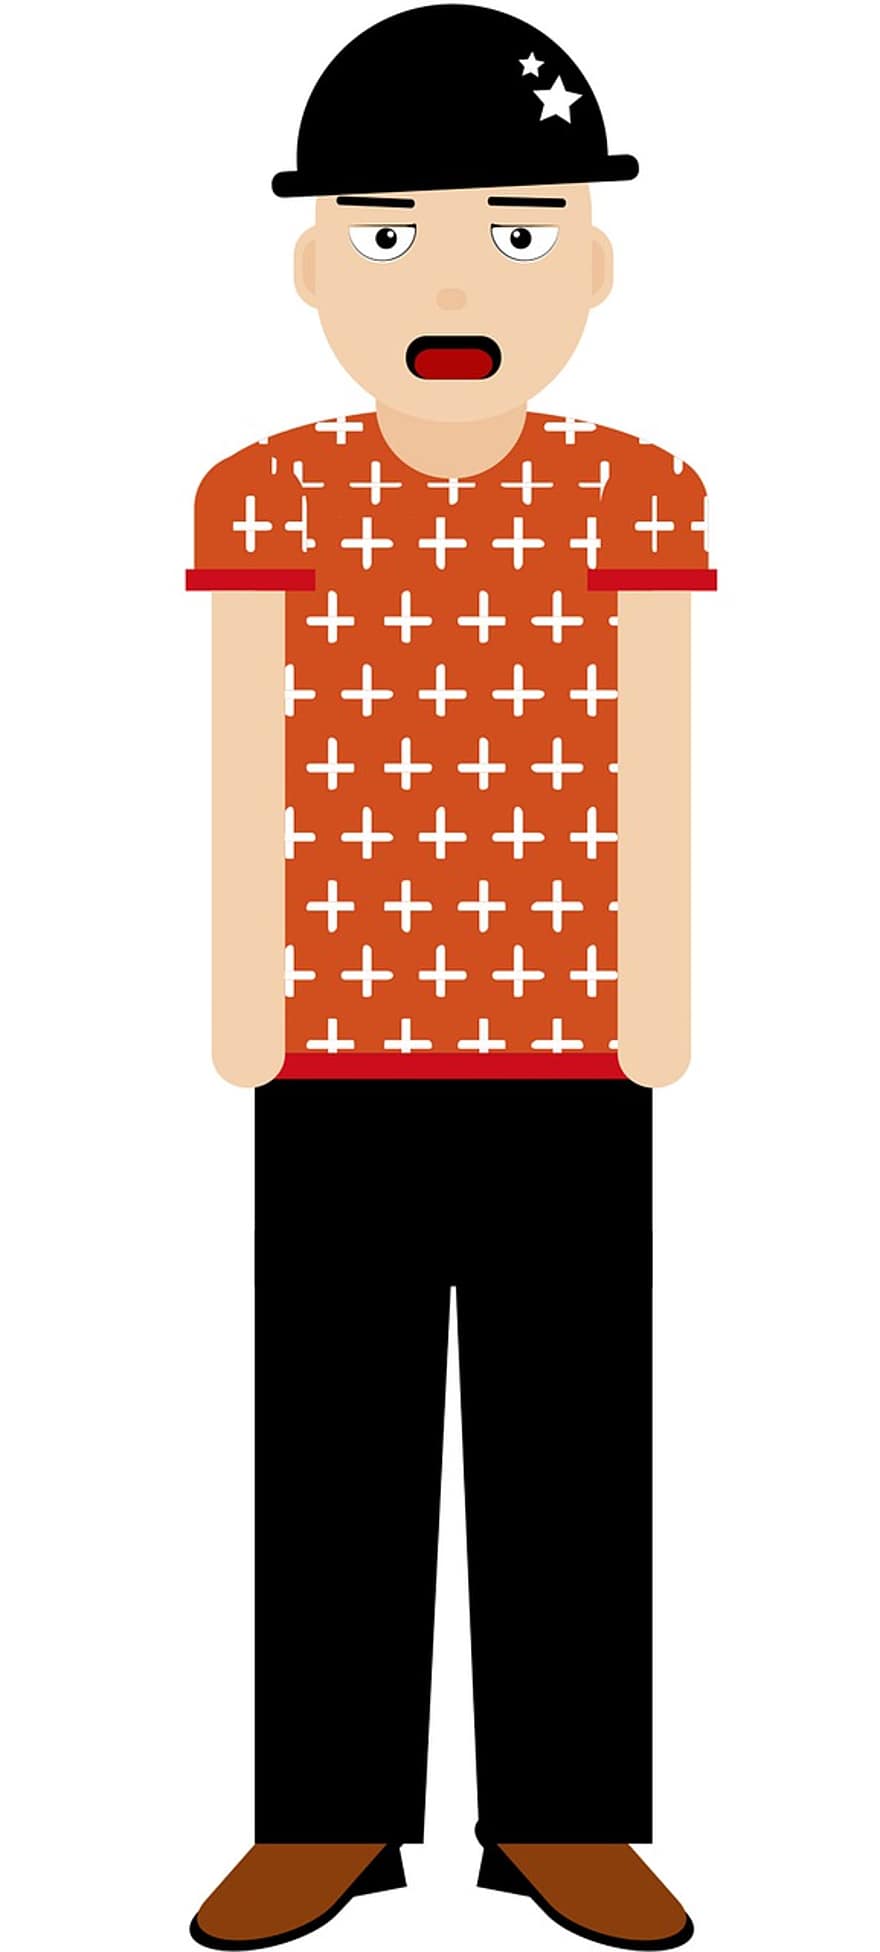 Tired, Man, men, vector, illustration, cartoon, boys, one person, adult, males, characters